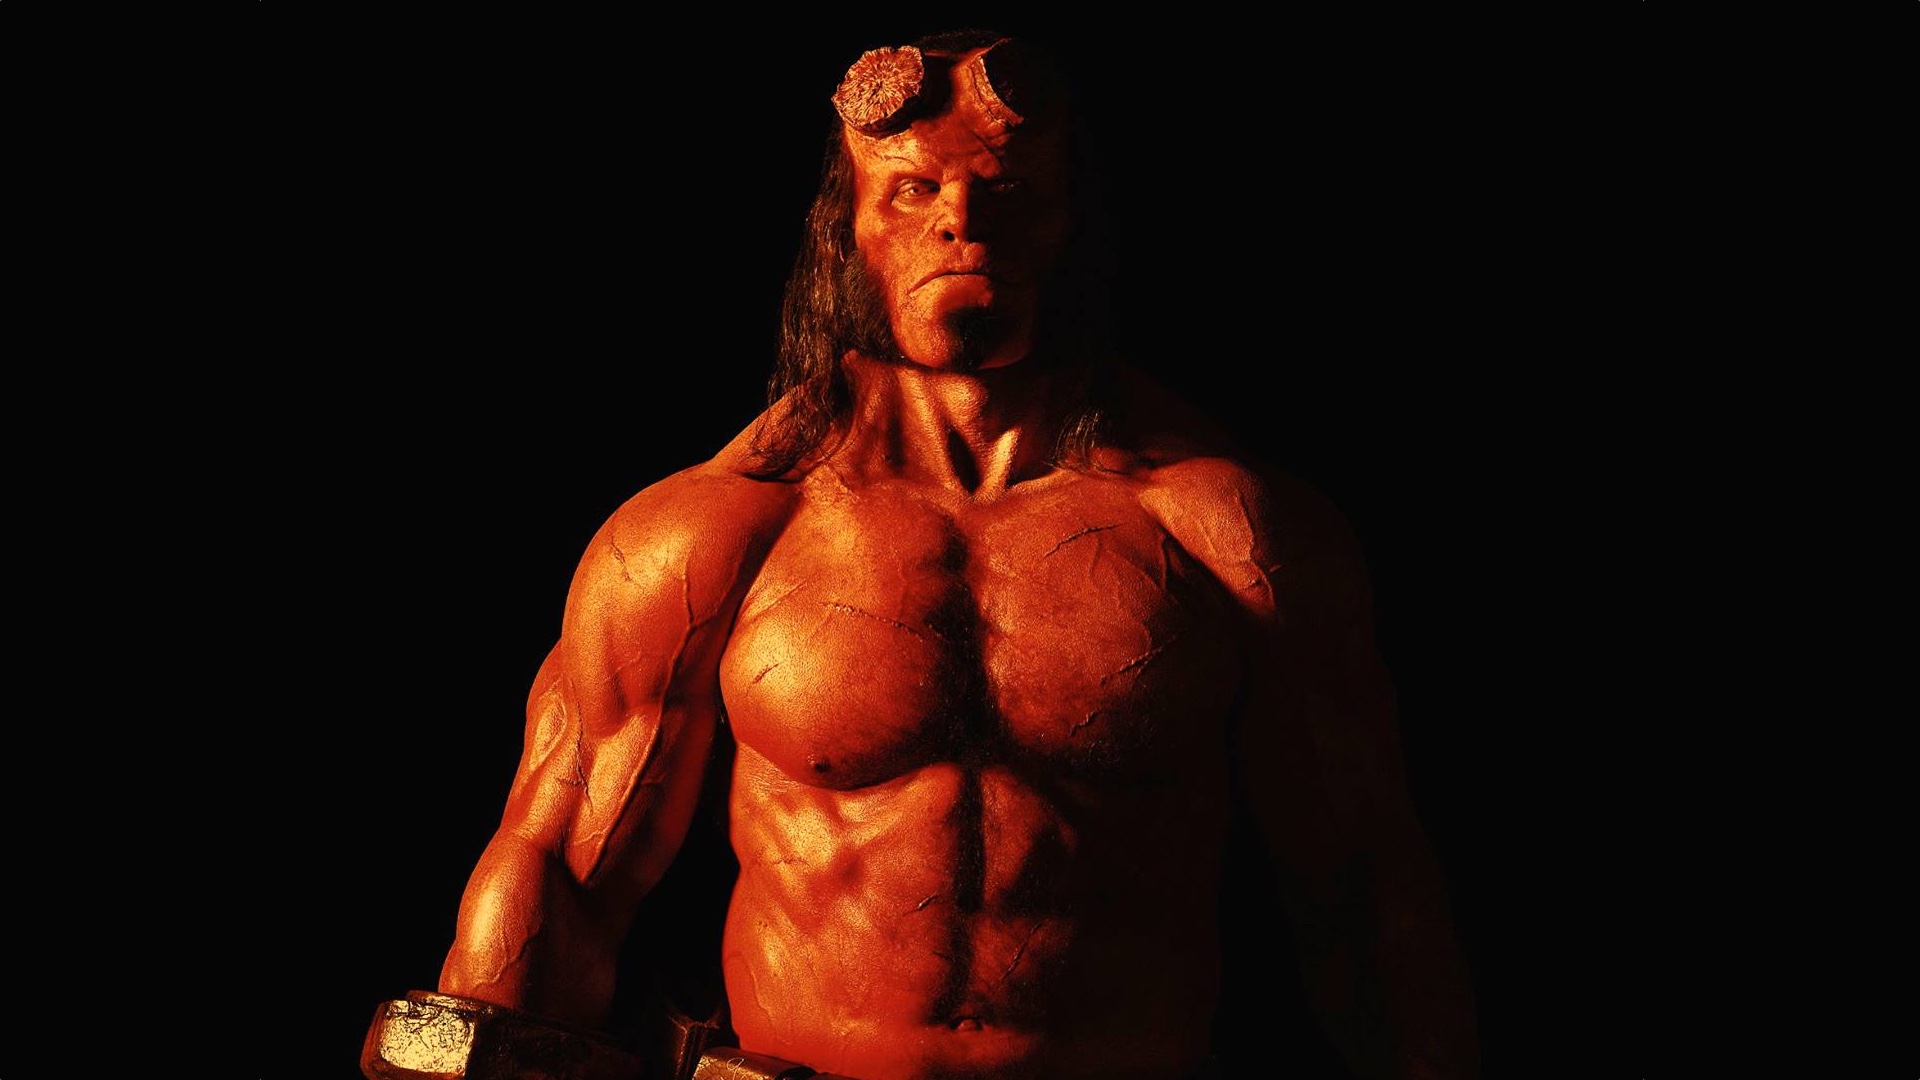 hellboy-the-new-movie-and-says-it-will-be-less-like-a-superhero-film-social